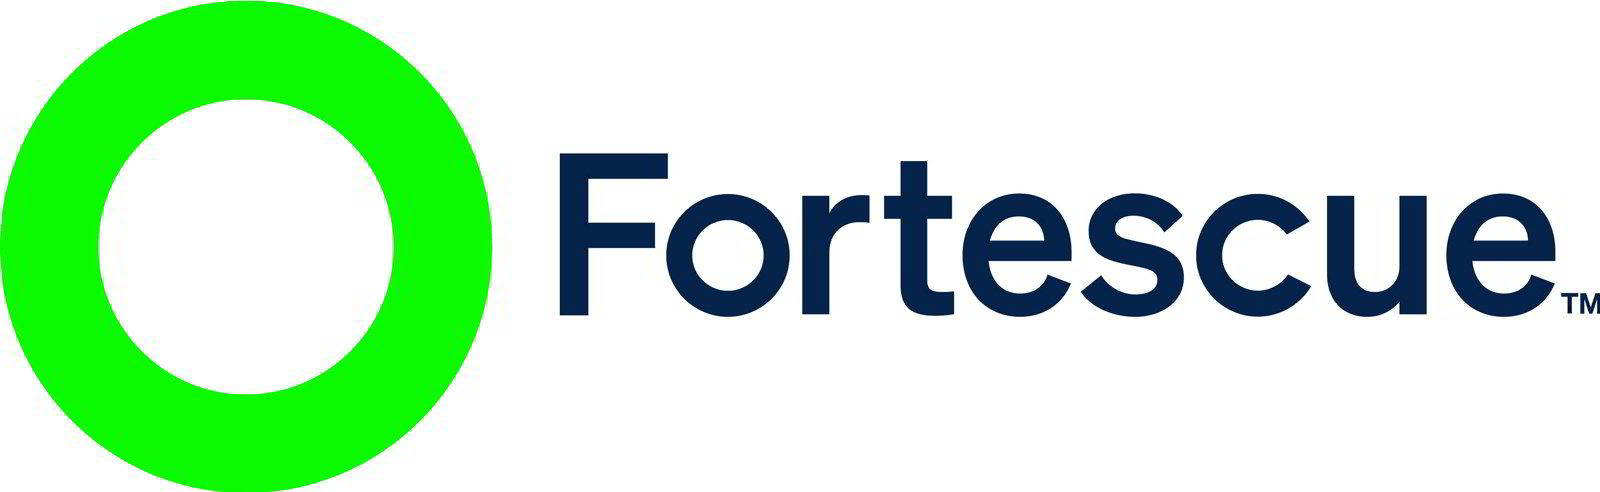 Autonomy Software Engineer - Fortescue